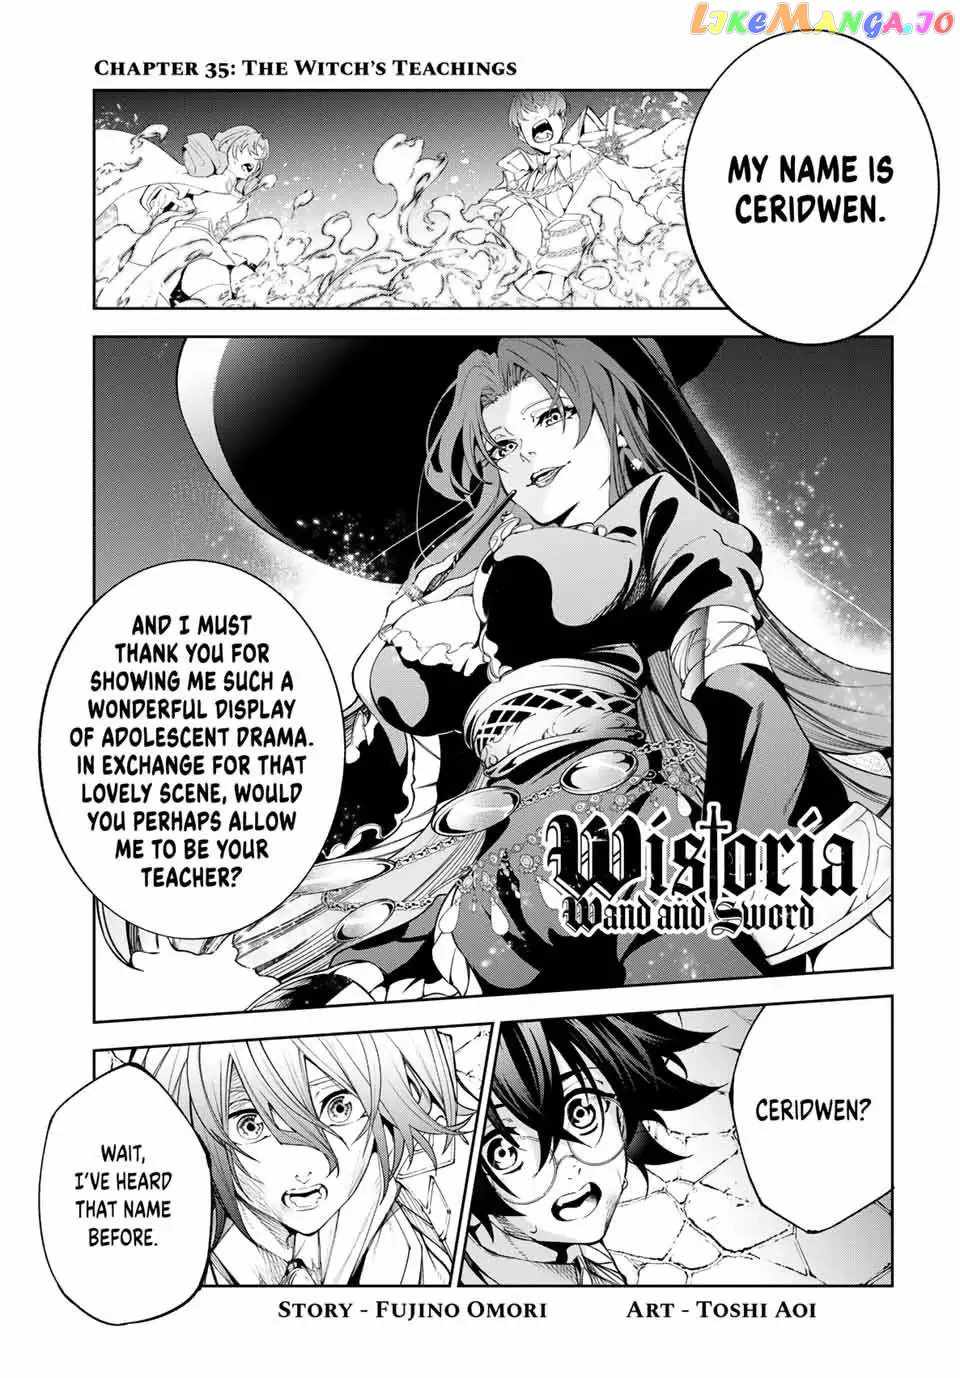 Wistoria's Wand And Sword Chapter 35 #1